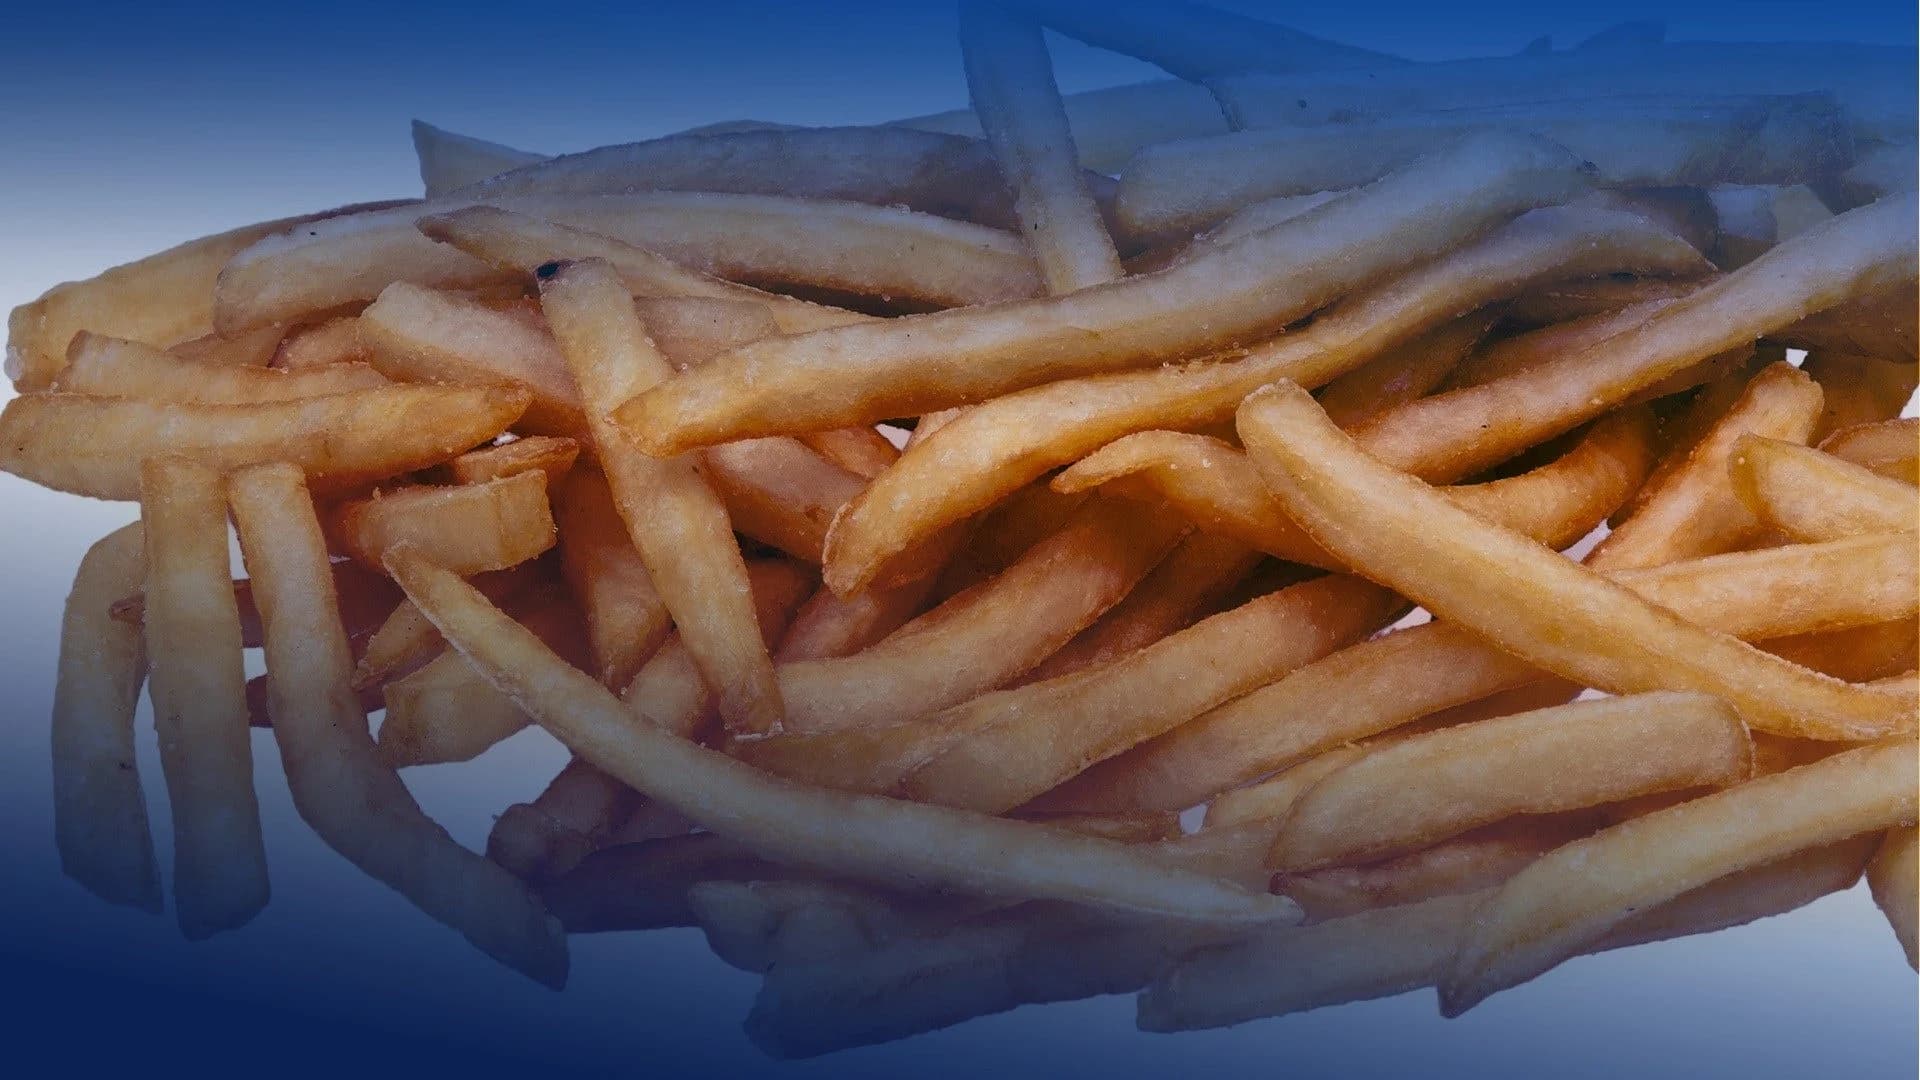 Who has the best fries according to a new report?